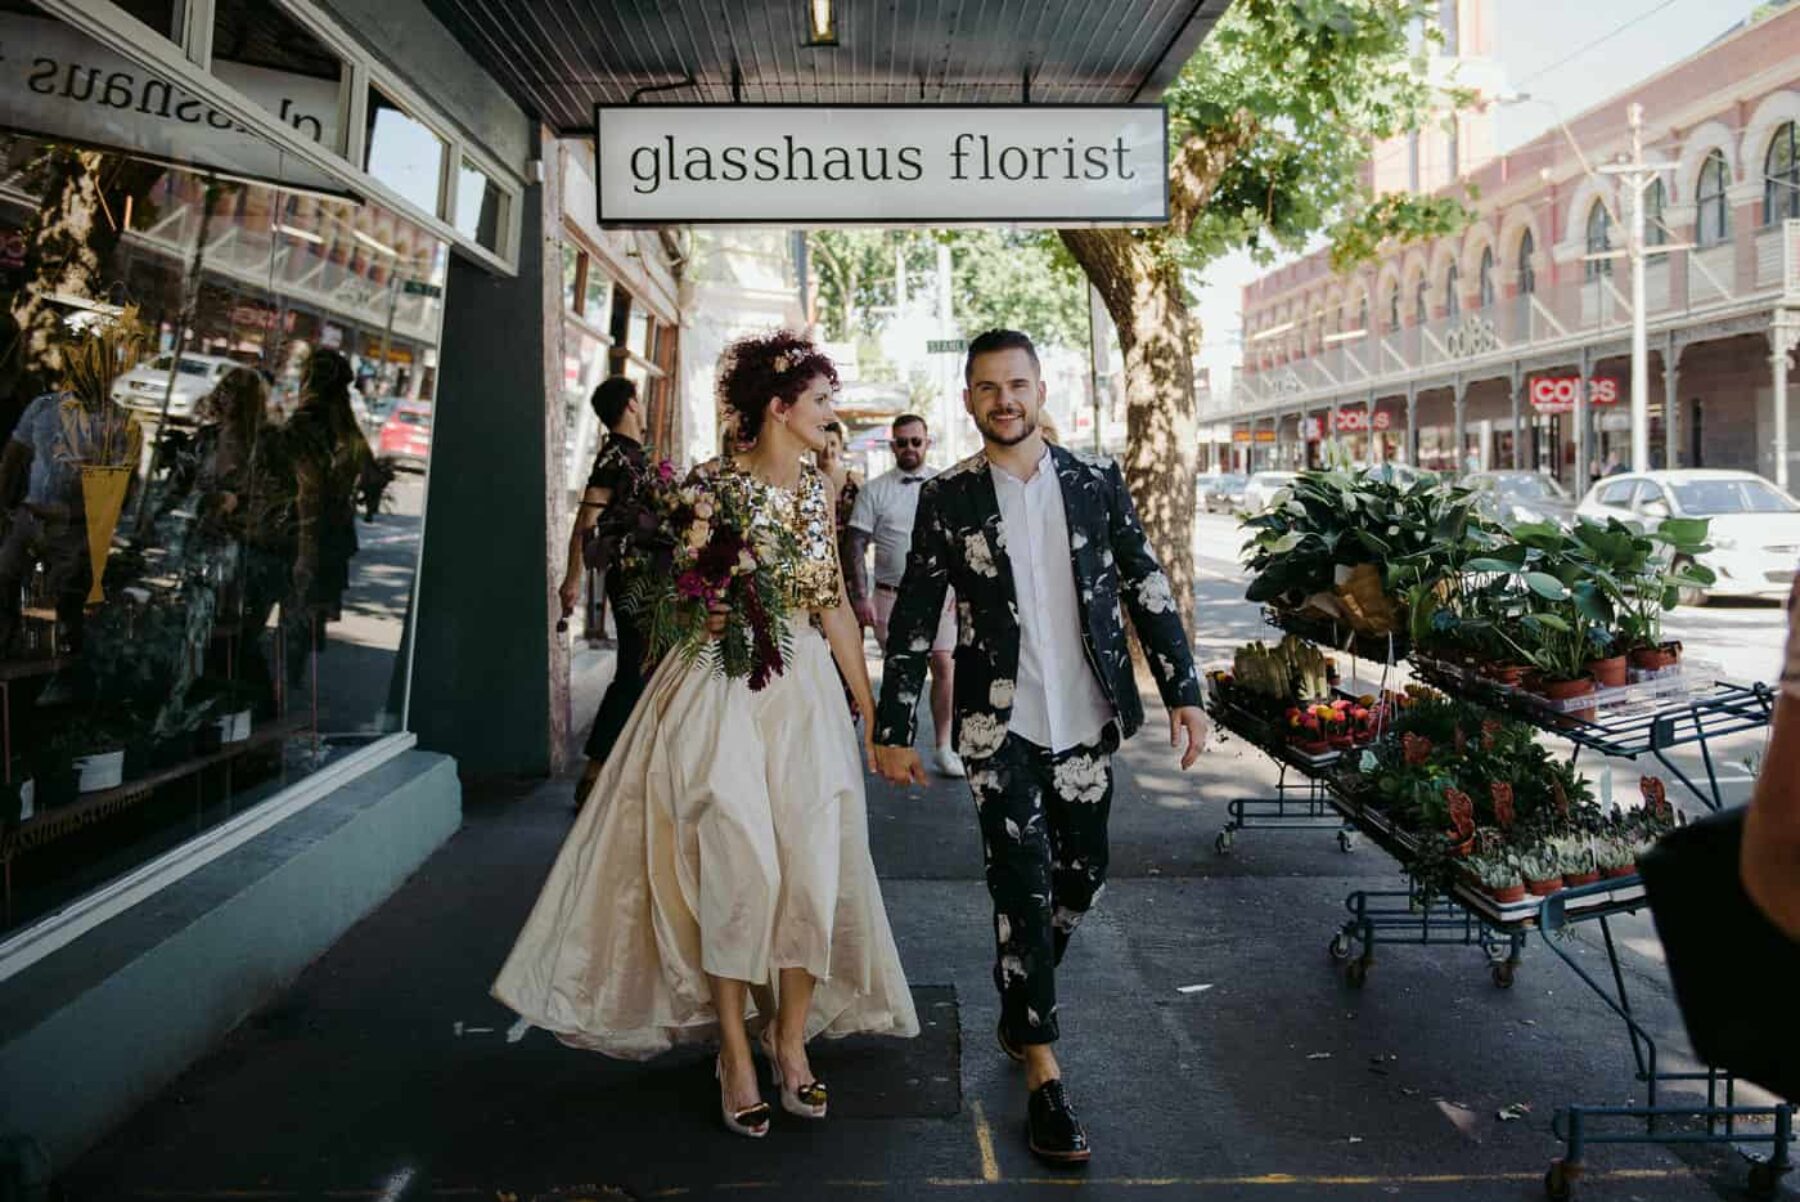 unique bride in gold two-piece wedding dress + groom in floral suit